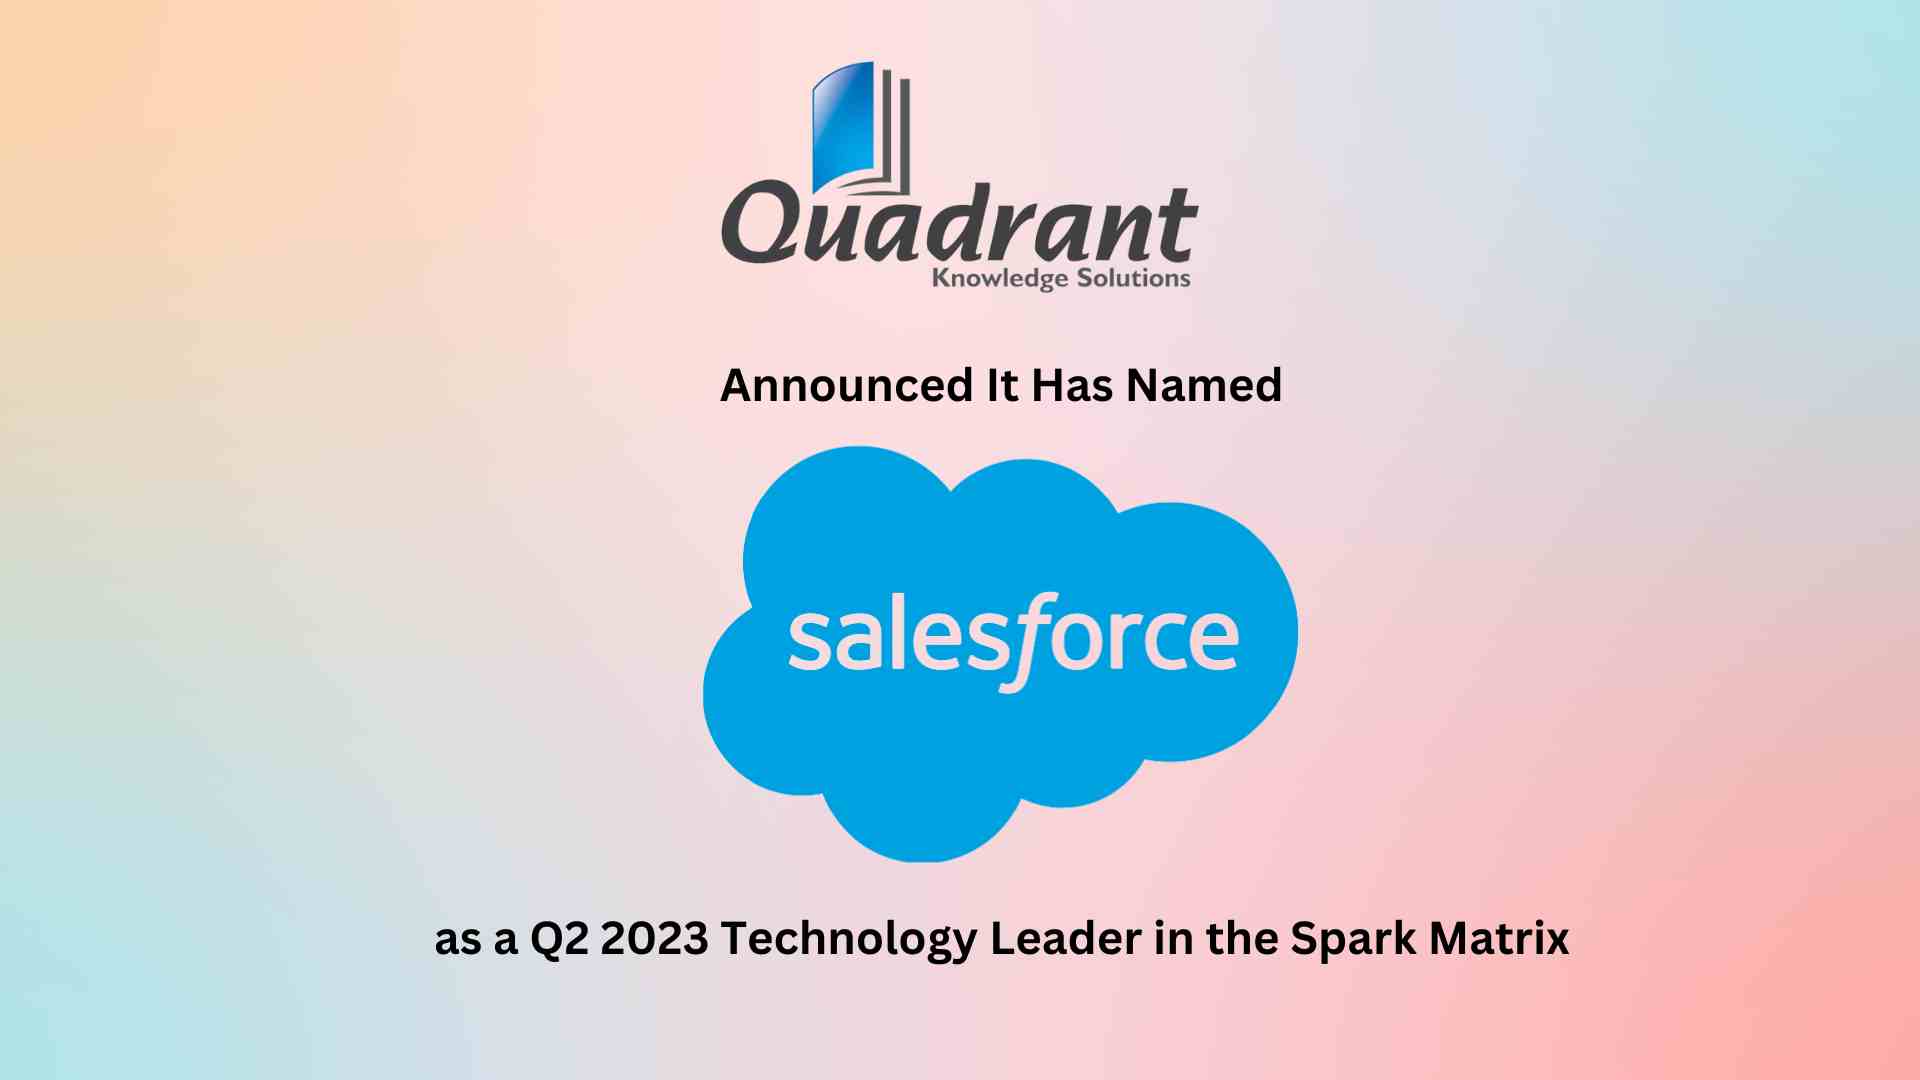 Salesforce positioned as a Leader in the SPARK Matrix for Customer Loyalty Solutions, Q2, 2023, by Quadrant Knowledge Solutions